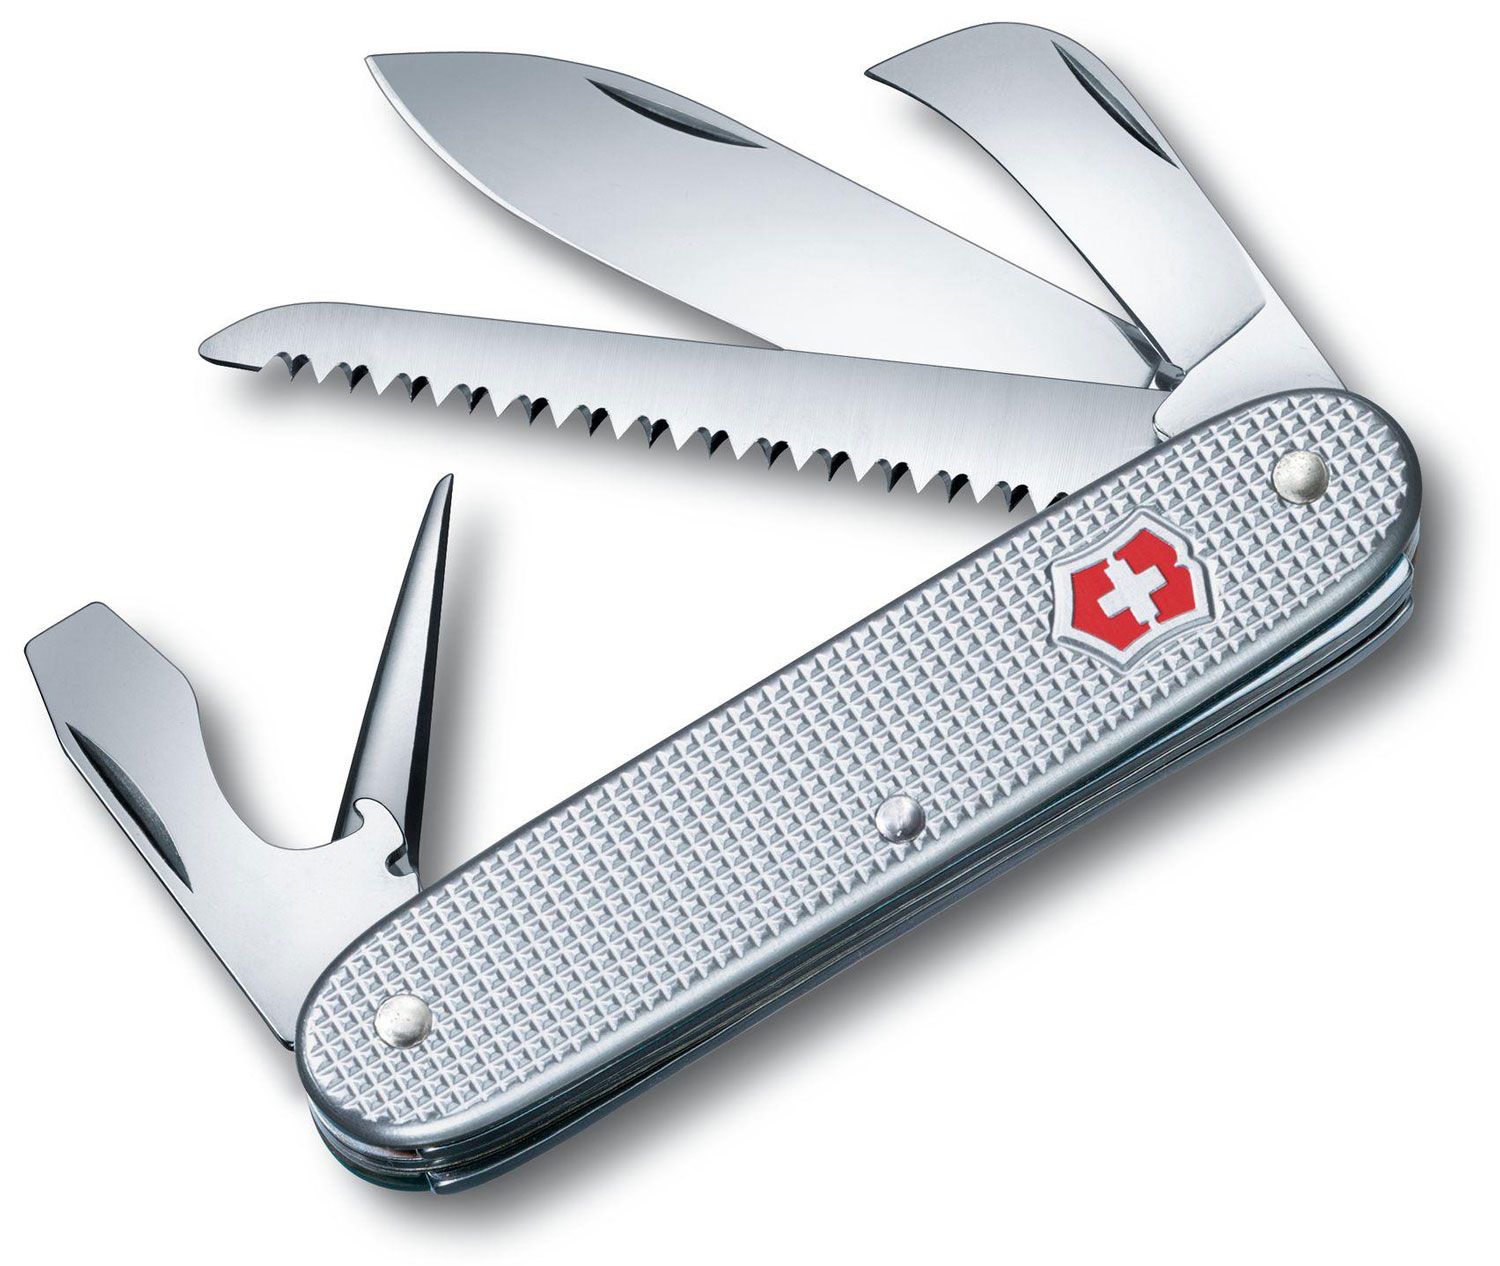 Victorinox Swiss Army 4 Floral Knife, Yellow - KnifeCenter